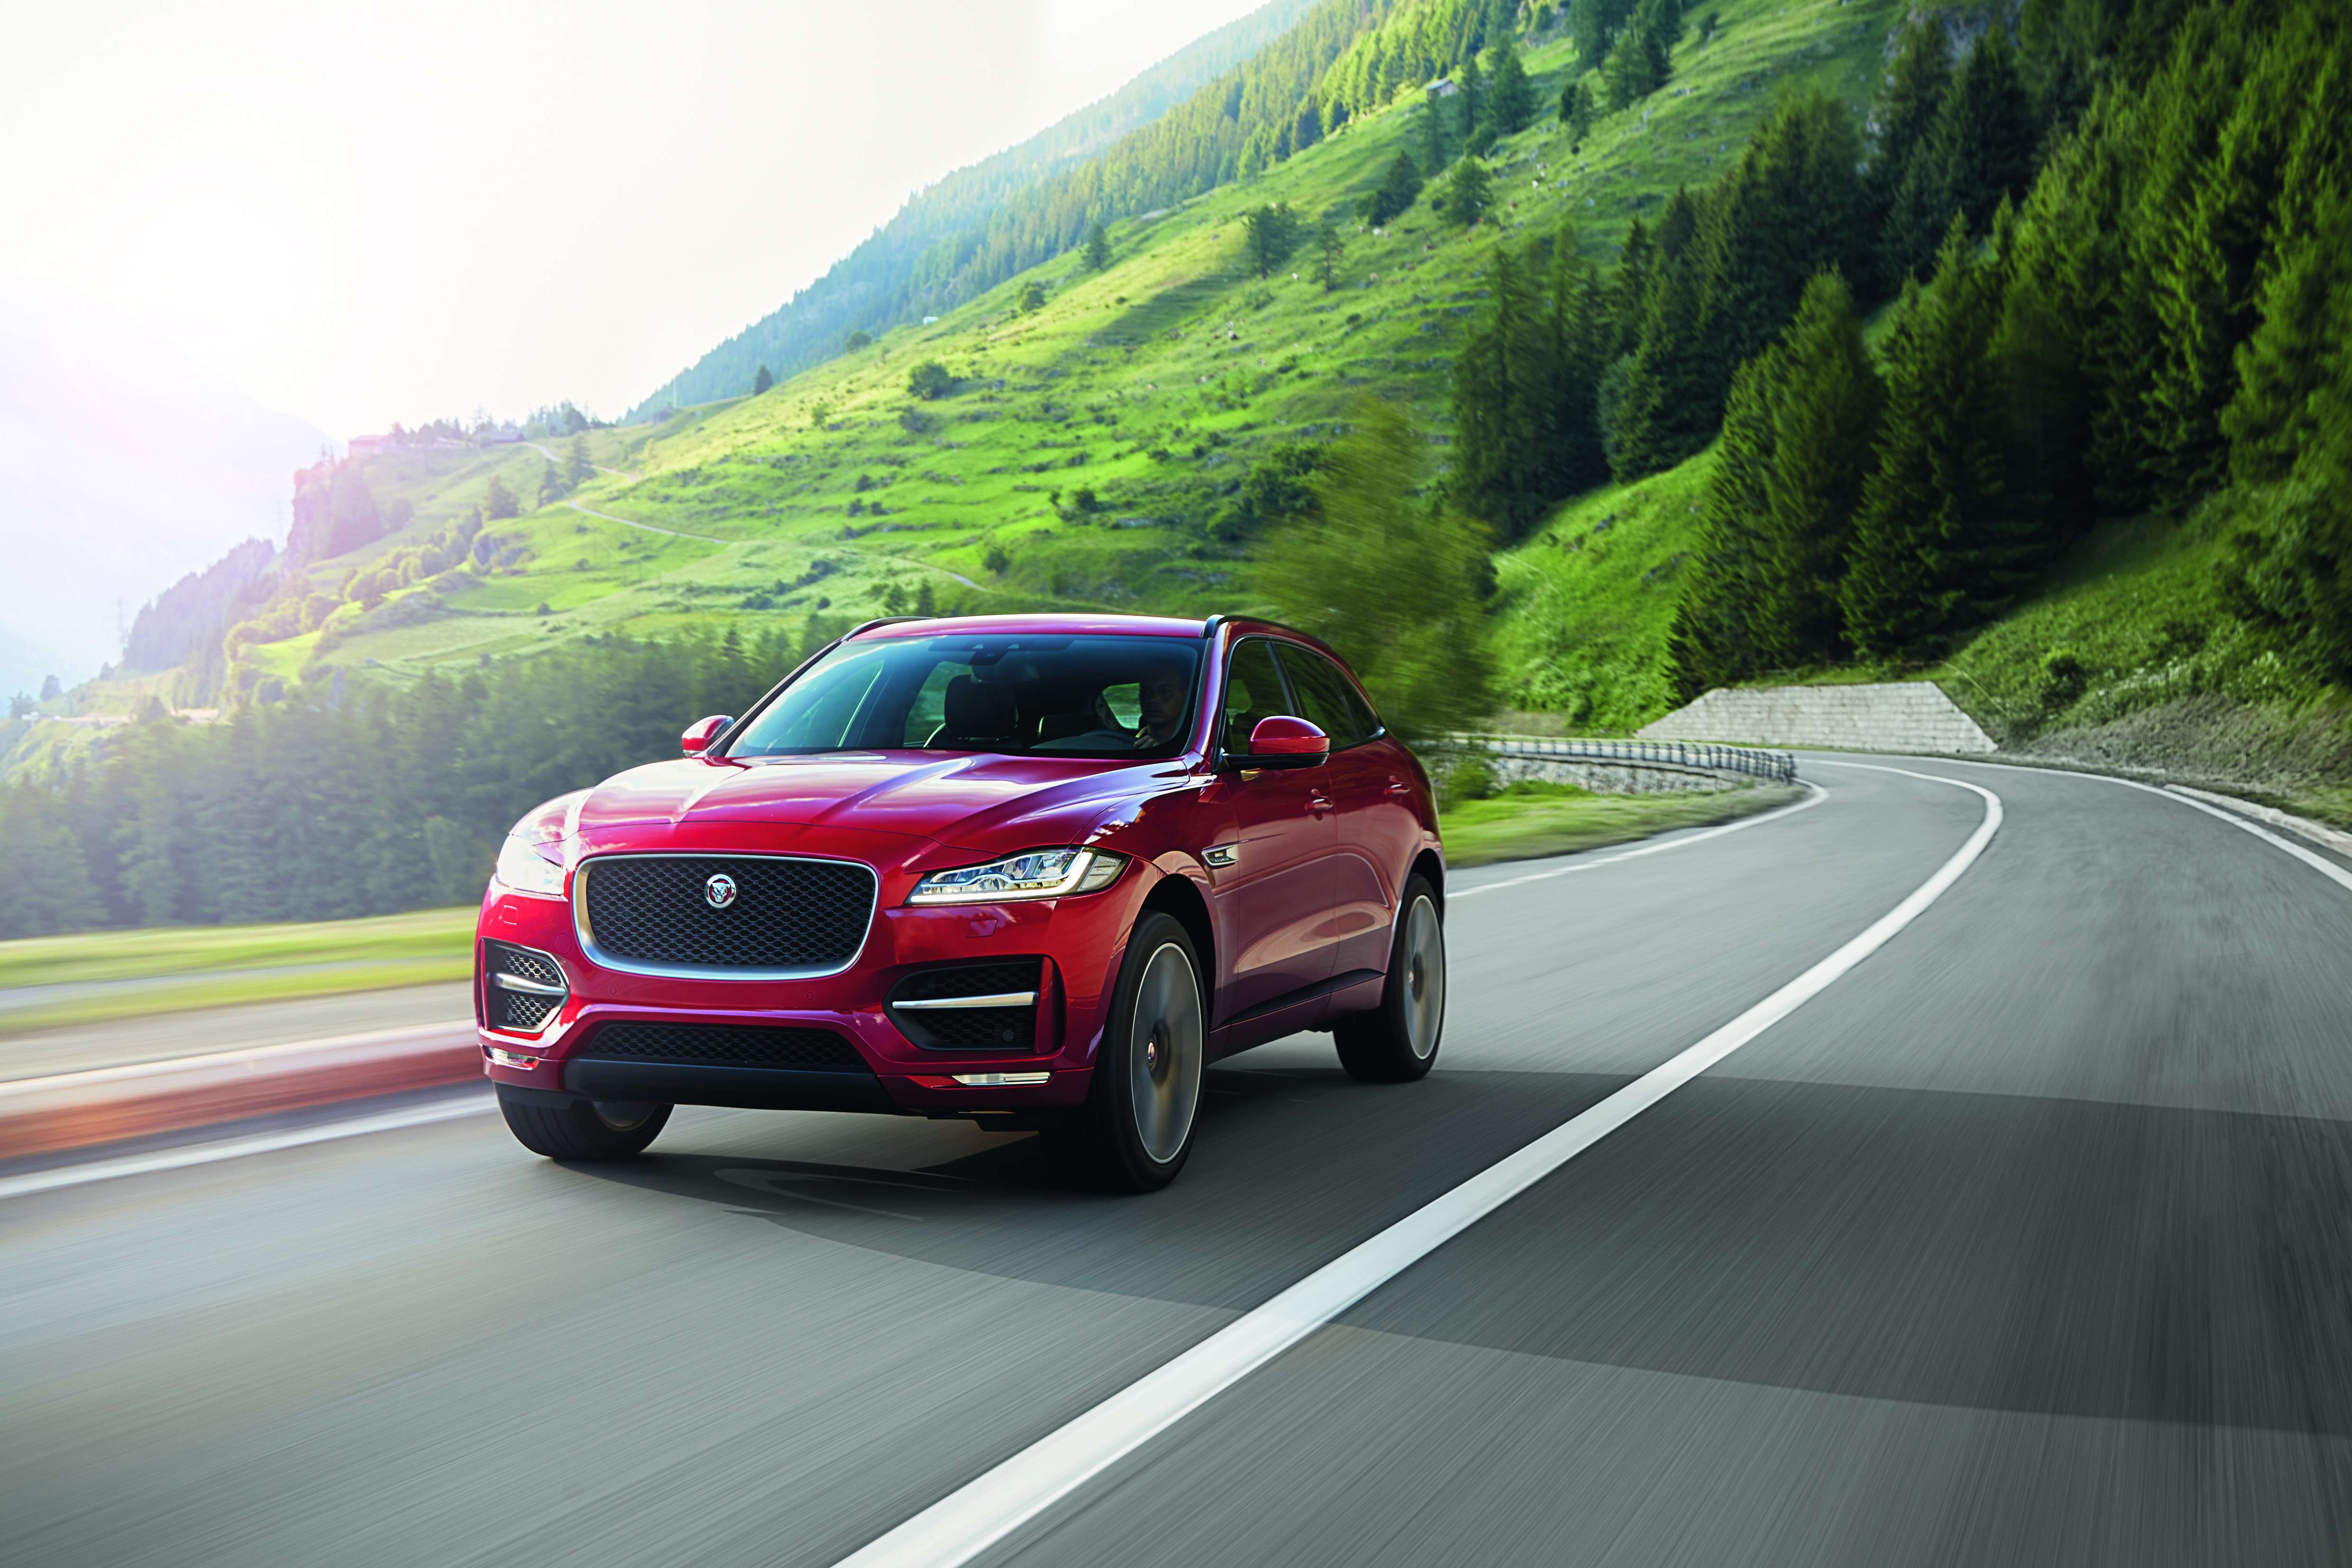 Jaguar is marketing the new F-Pace as the “ultimate practical sports car”. Photo: Newspress